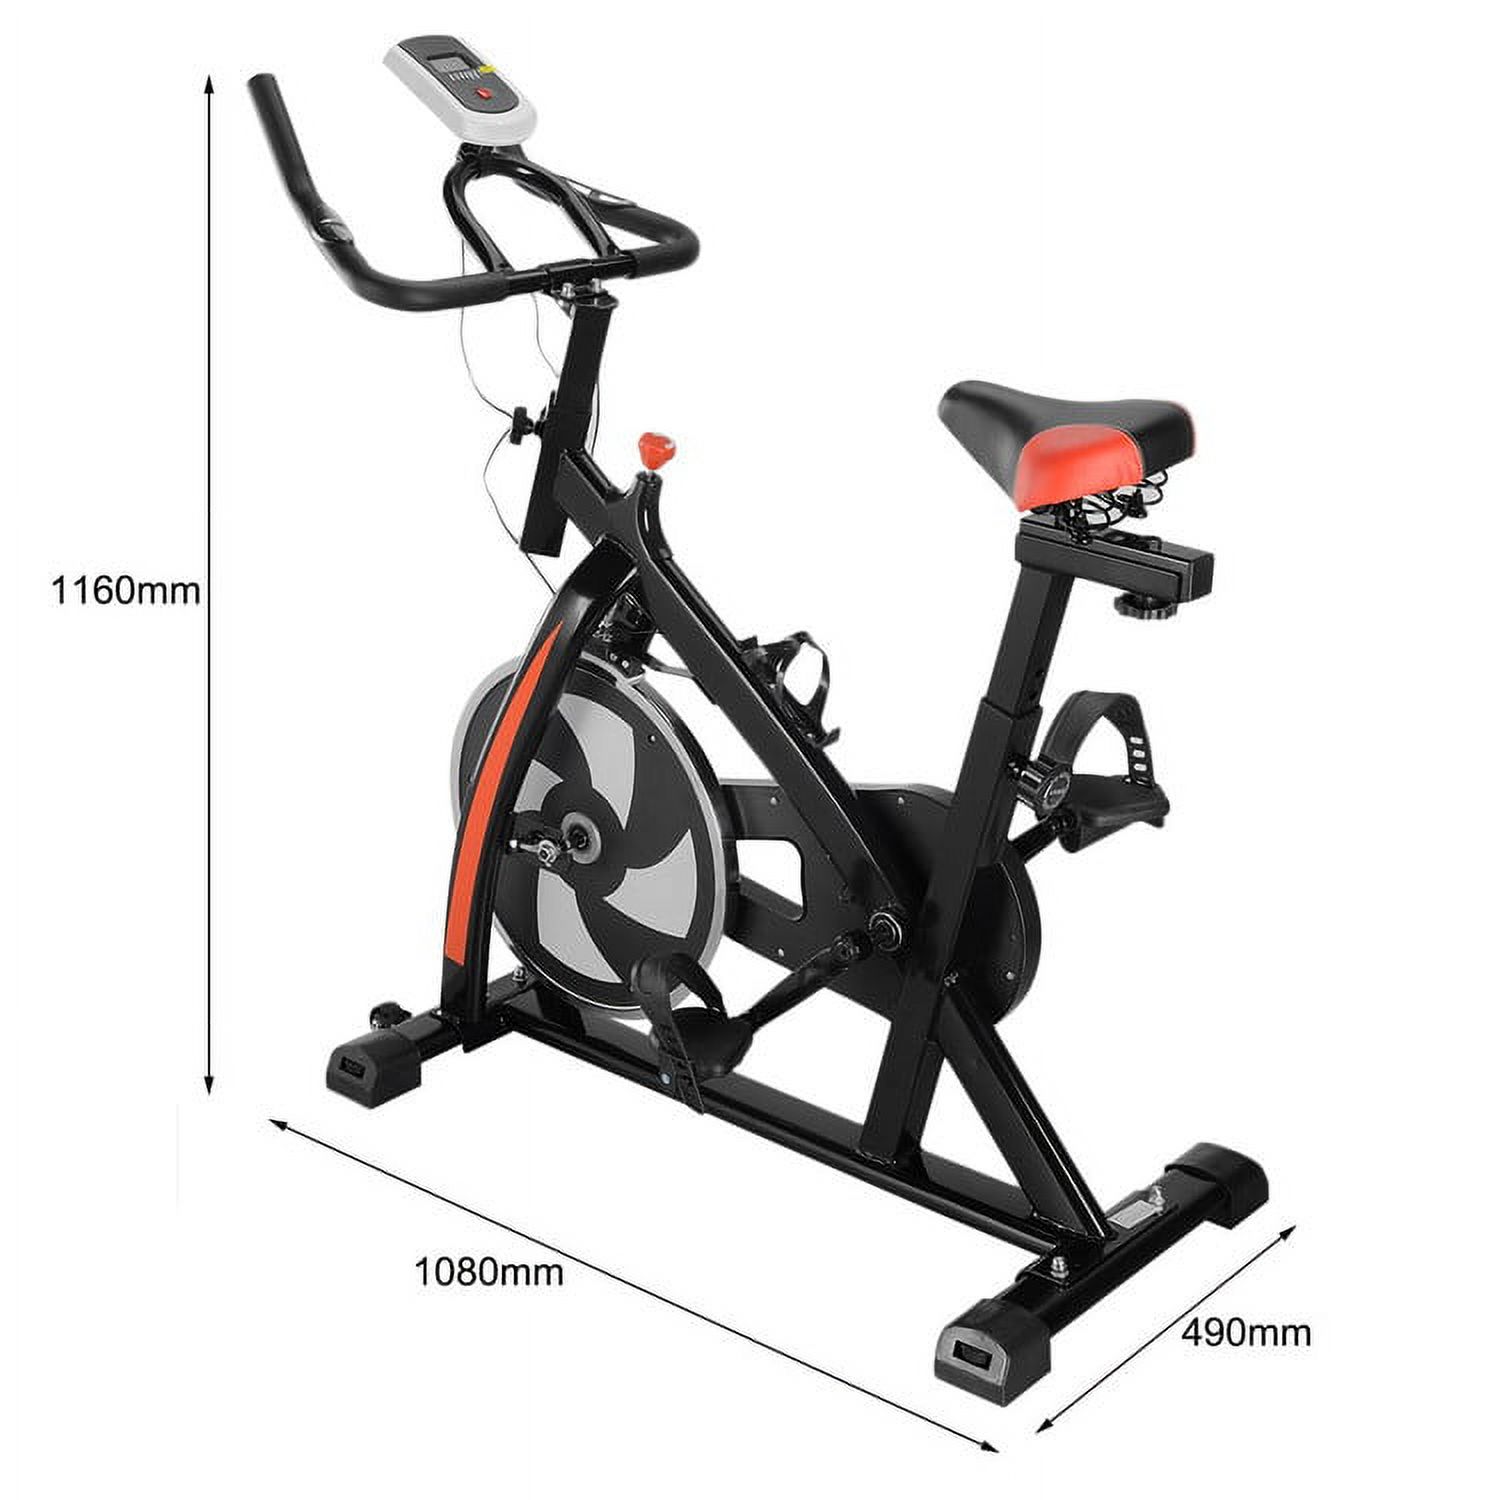 Indoor Cycling Trainer Exercise Bike Cycling Twisting Mini Exercise Bike Equipment (Black) - image 4 of 4